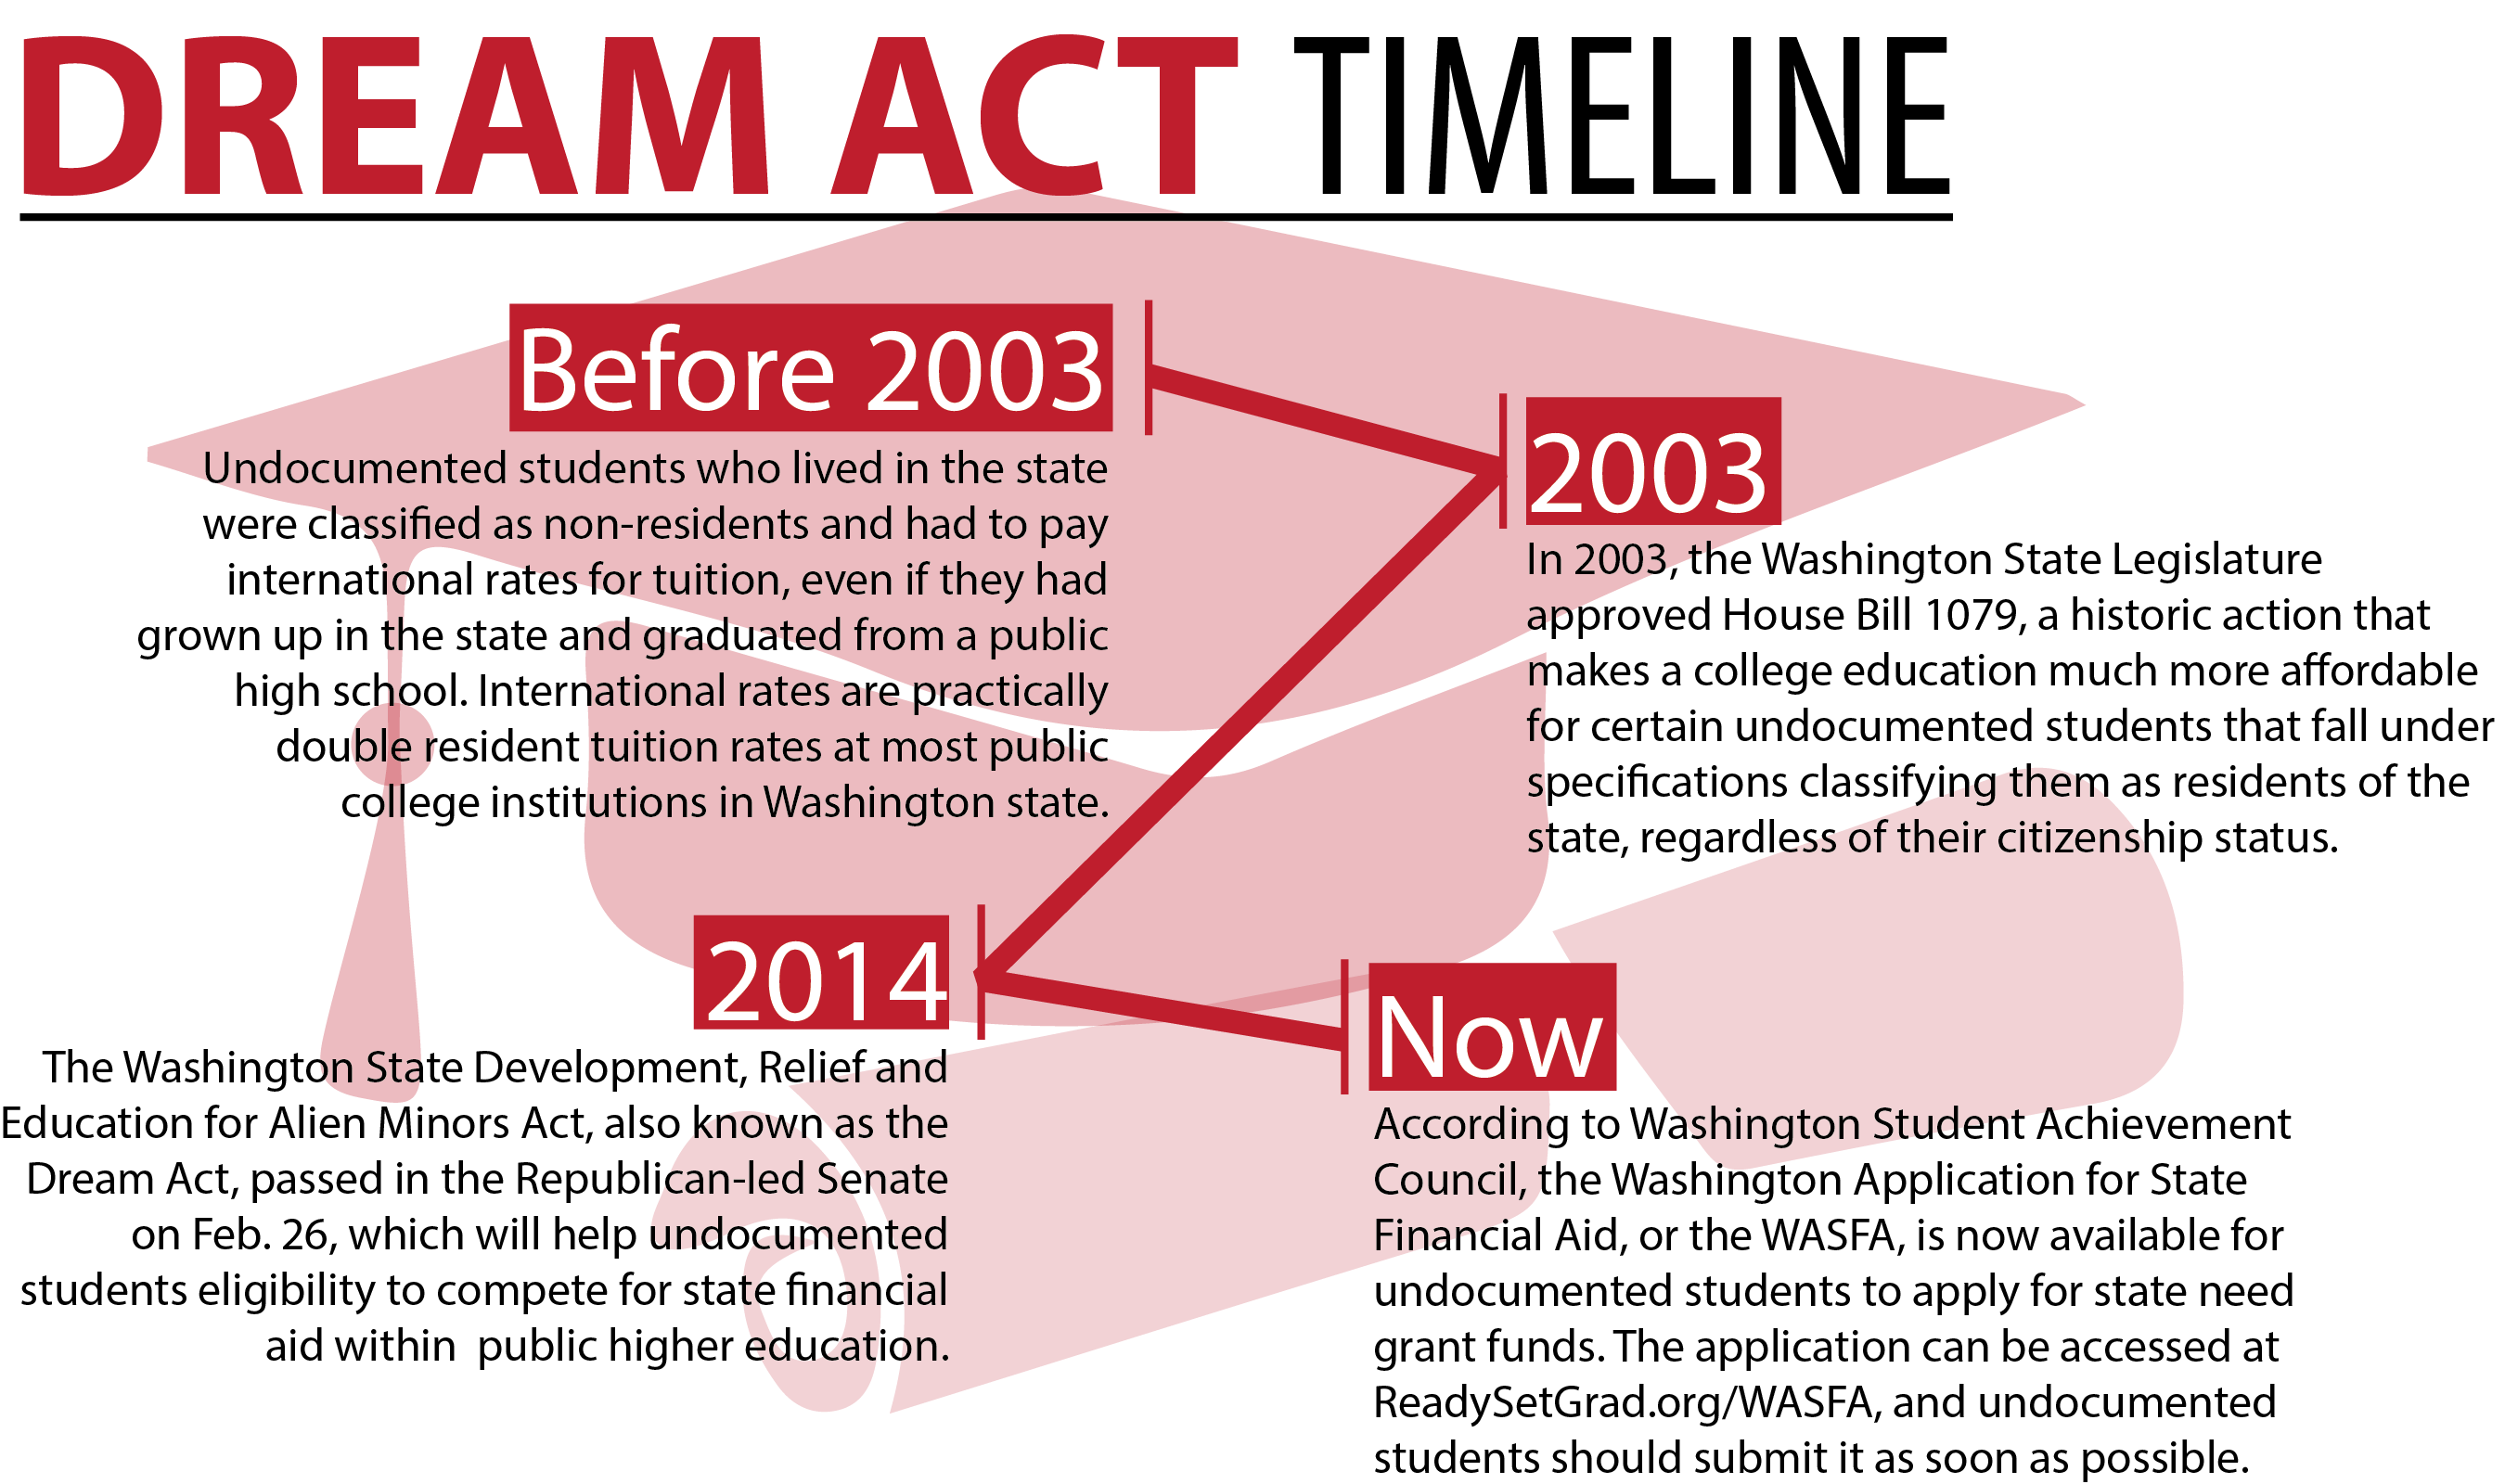 undocumented students and higher education infographic